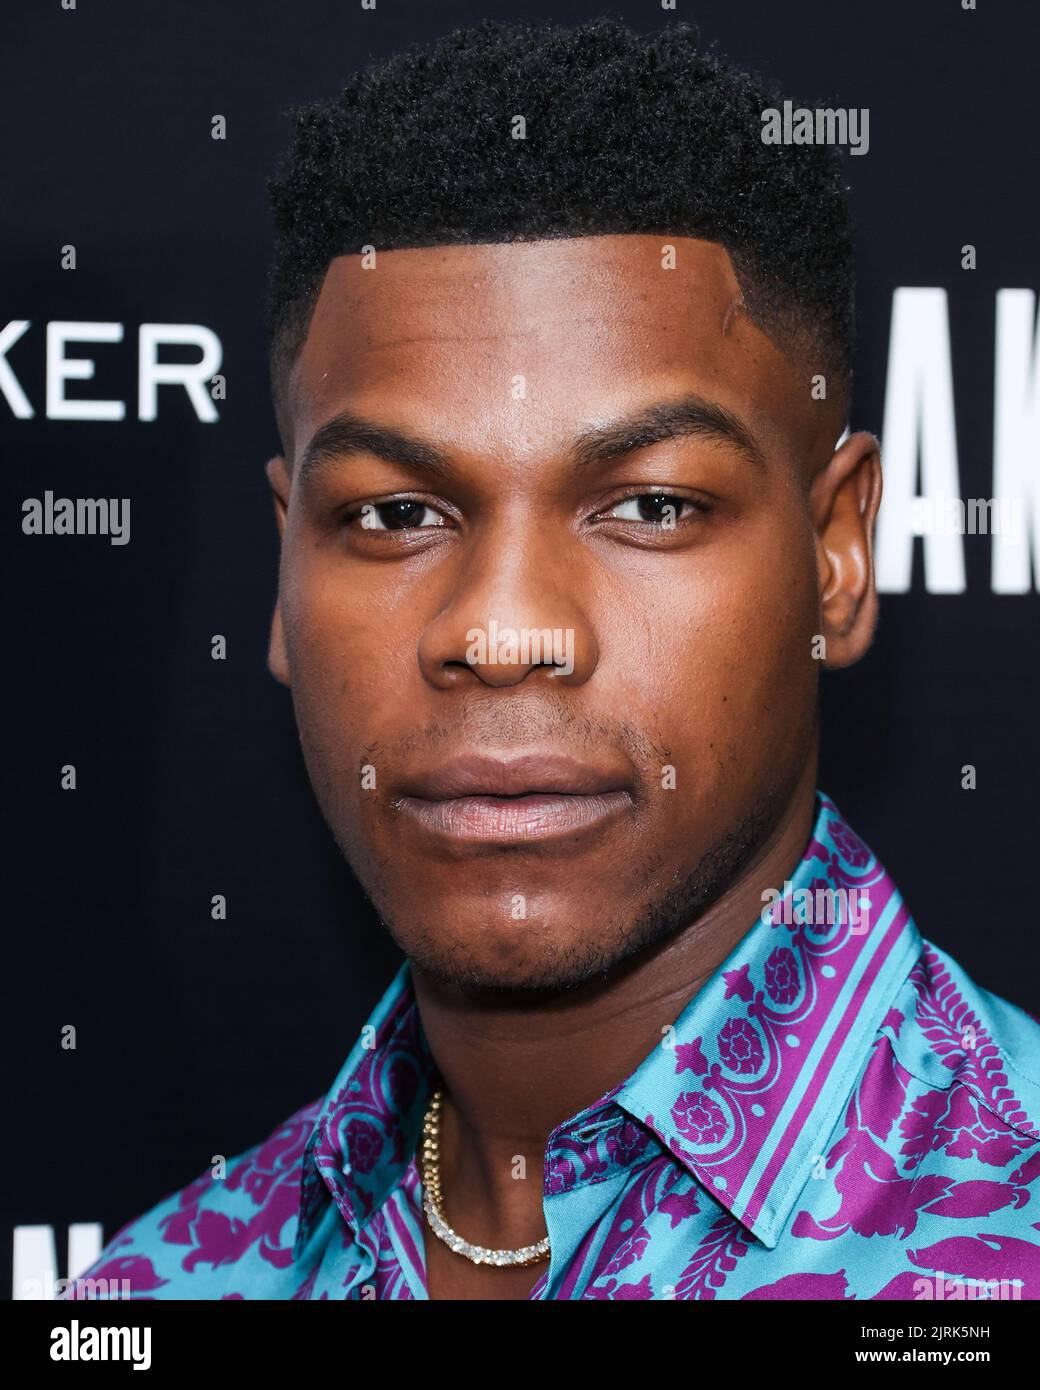 West Hollywood, United States. 24th Aug, 2022. WEST HOLLYWOOD, LOS ANGELES, CALIFORNIA, USA - AUGUST 24: British actor John Boyega arrives at the Los Angeles Special Screening Of Bleecker Street Media's 'Breaking' held at The London Hotel West Hollywood at Beverly Hills on August 24, 2022 in West Hollywood, Los Angeles, California, United States. (Photo by Xavier Collin/Image Press Agency) Credit: Image Press Agency/Alamy Live News Stock Photo